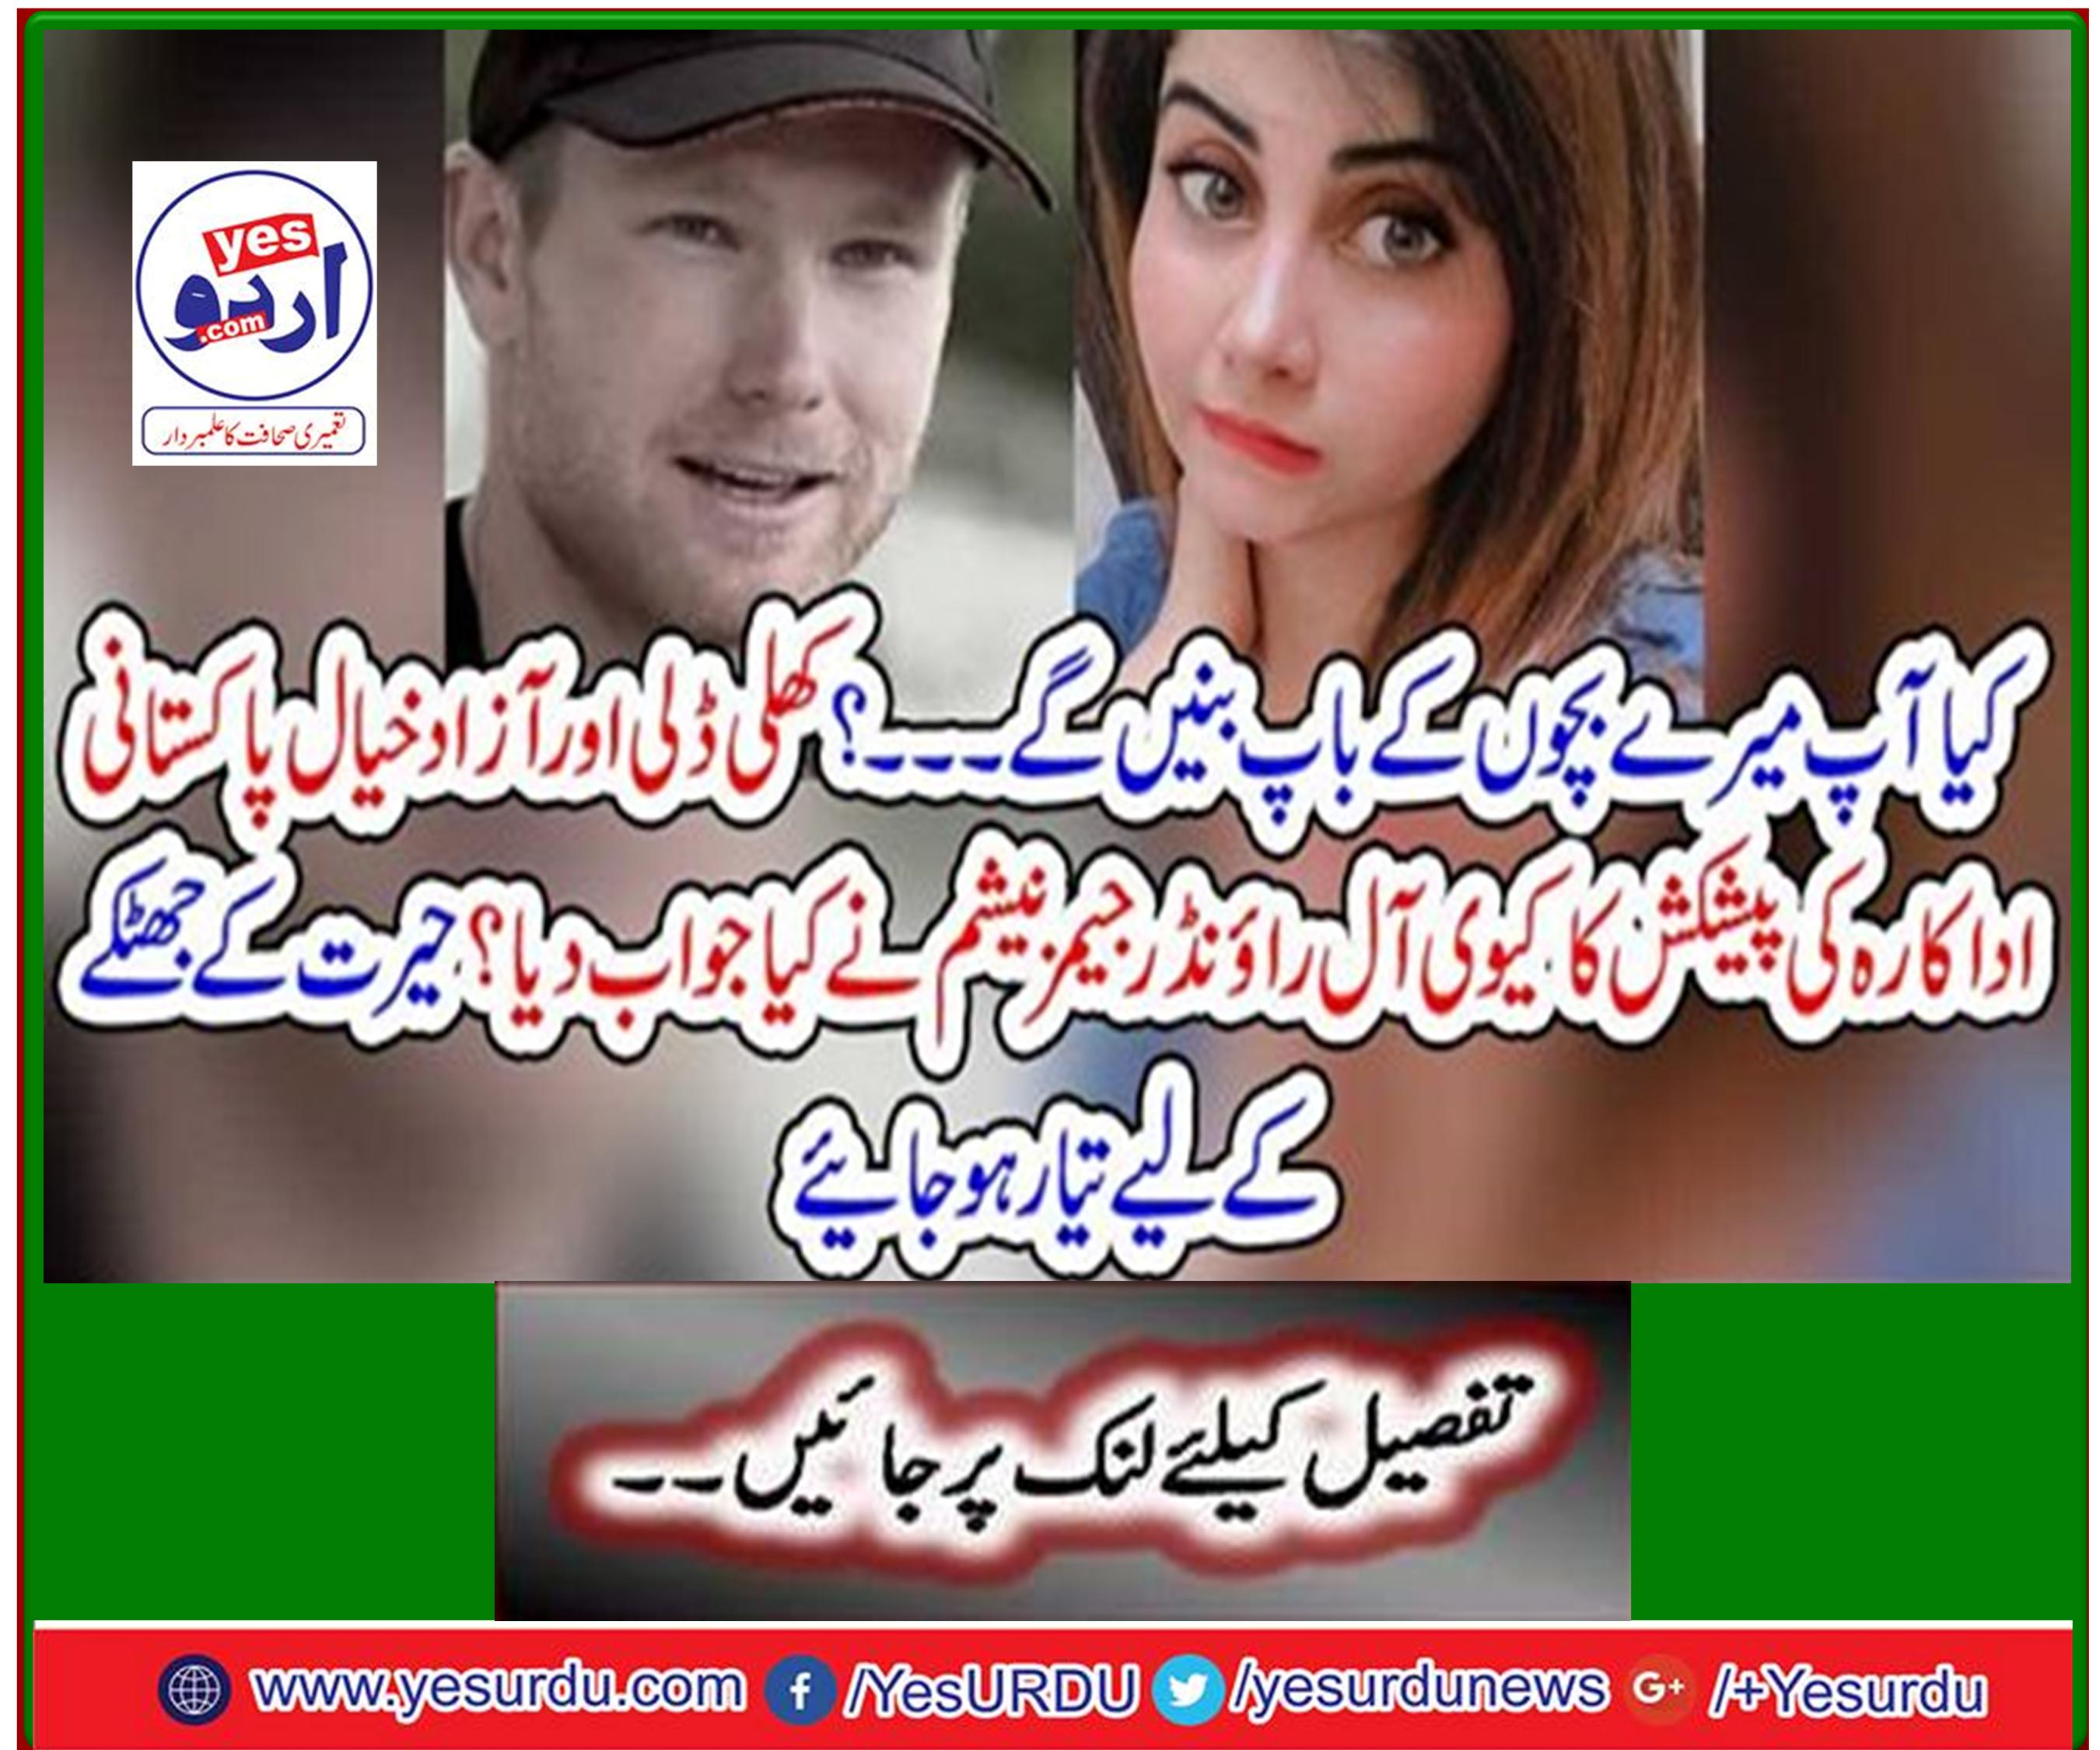 How did Kiwi all-rounder James Neesham respond to an open-minded and open-minded Pakistani actress? Get ready for a surprise shock